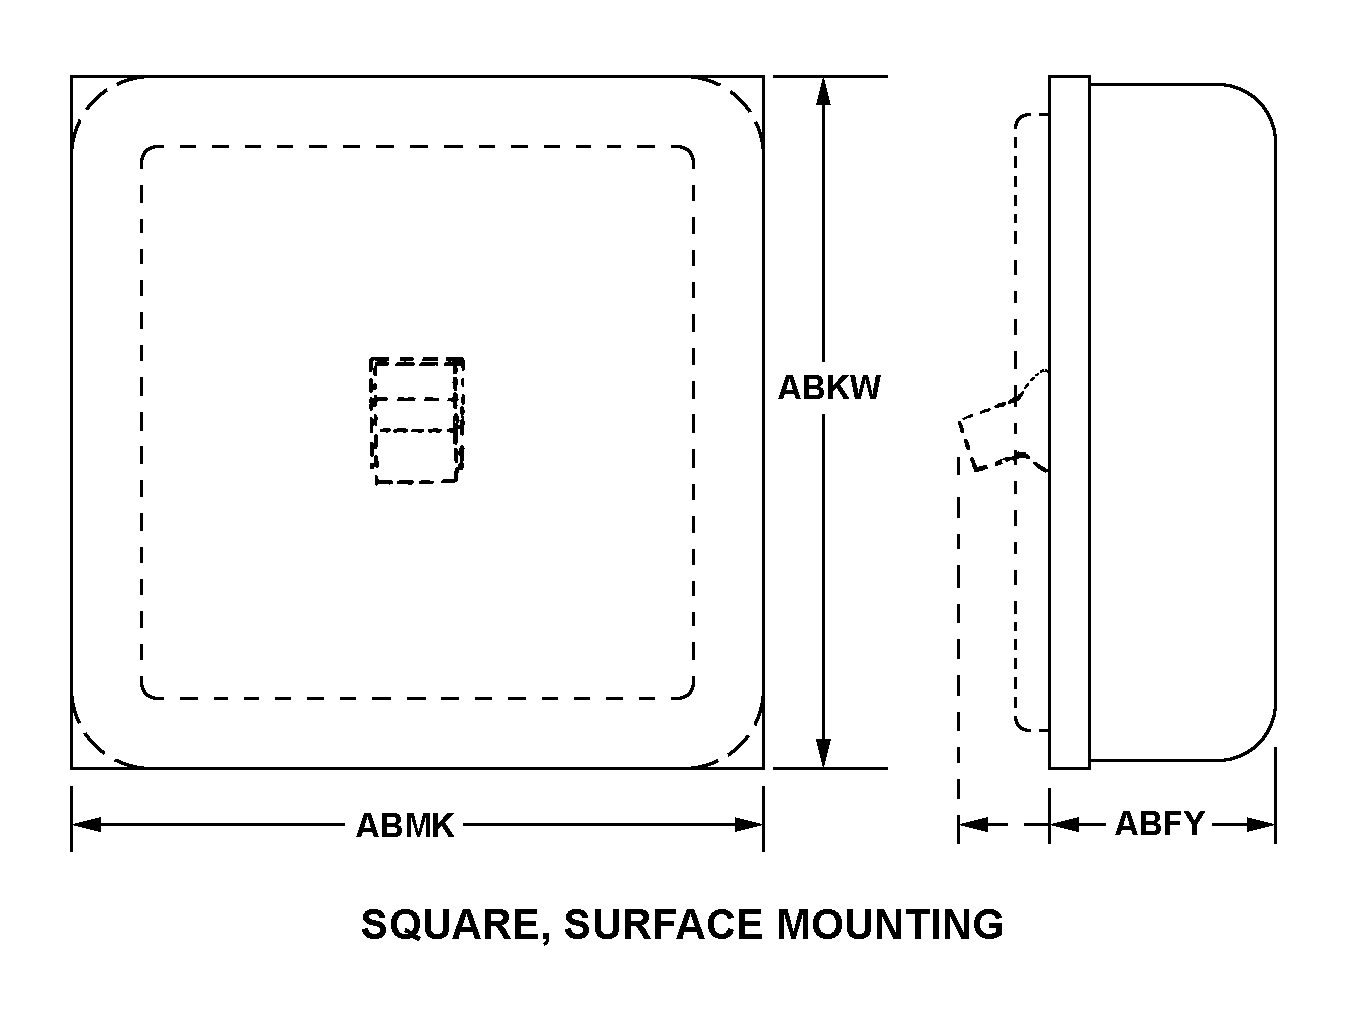 SQUARE, SURFACE MOUNTING style nsn 6110-01-046-0120